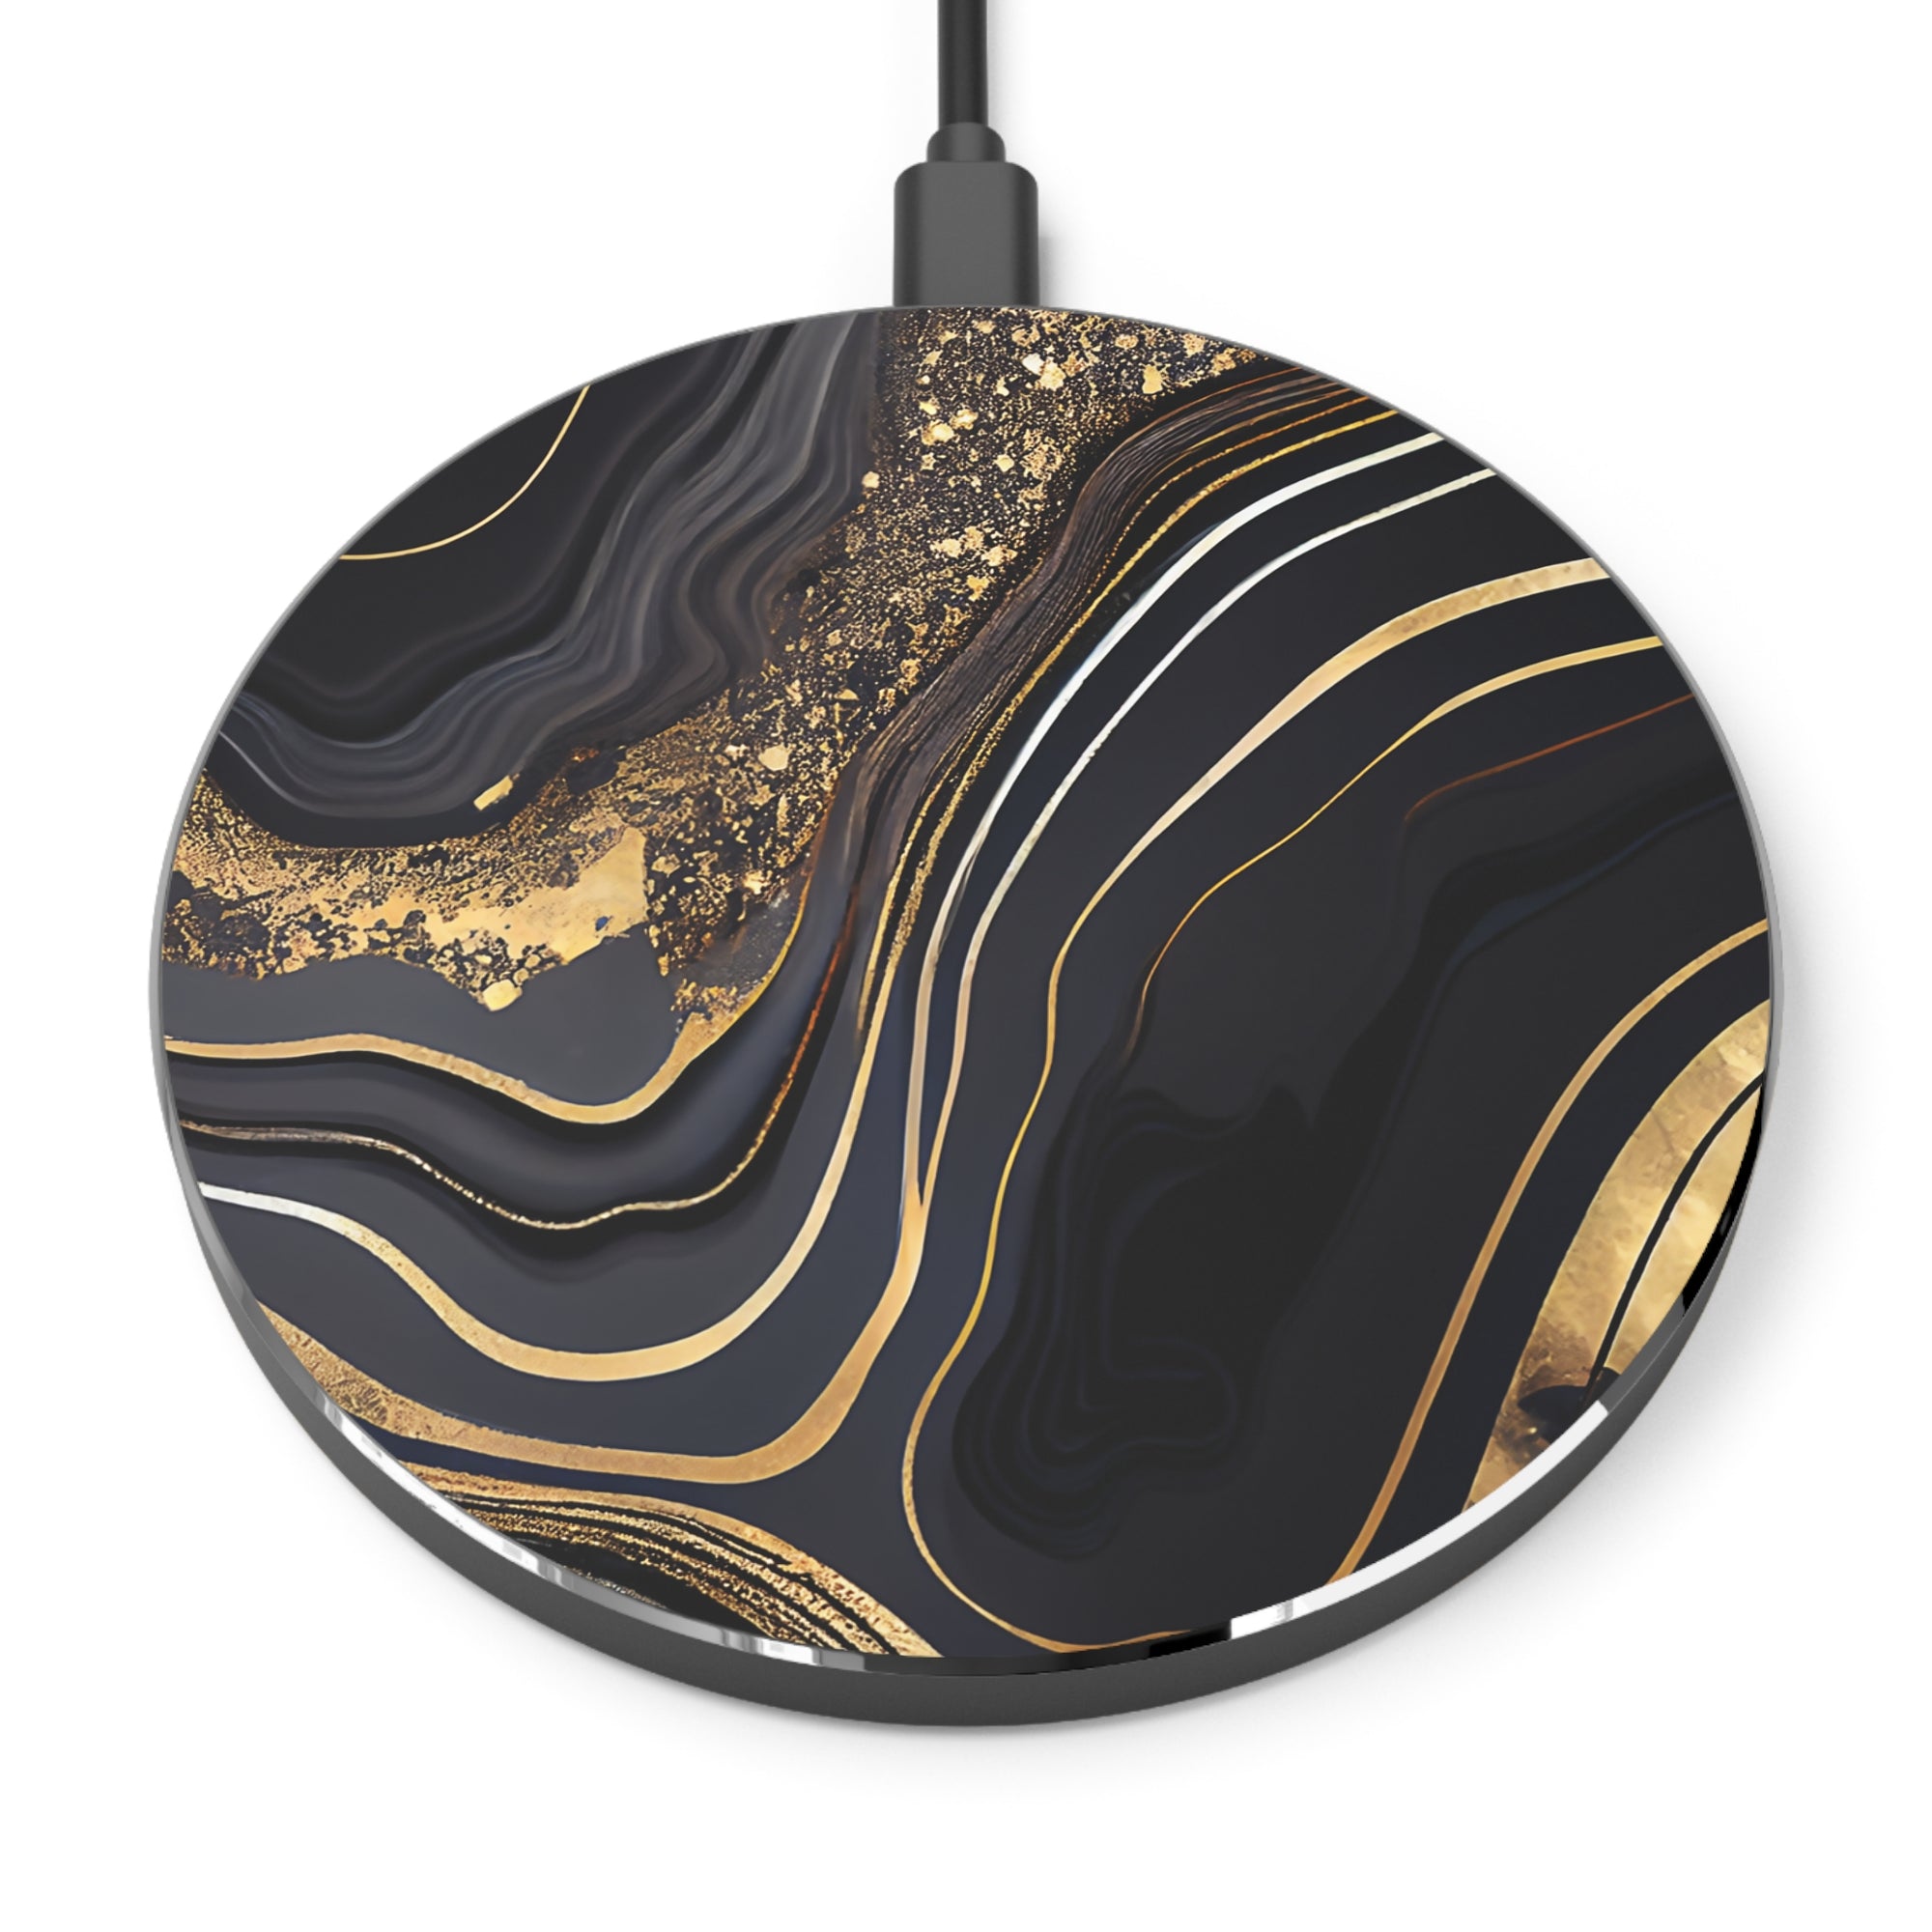 Wireless Charger black and gold marble design